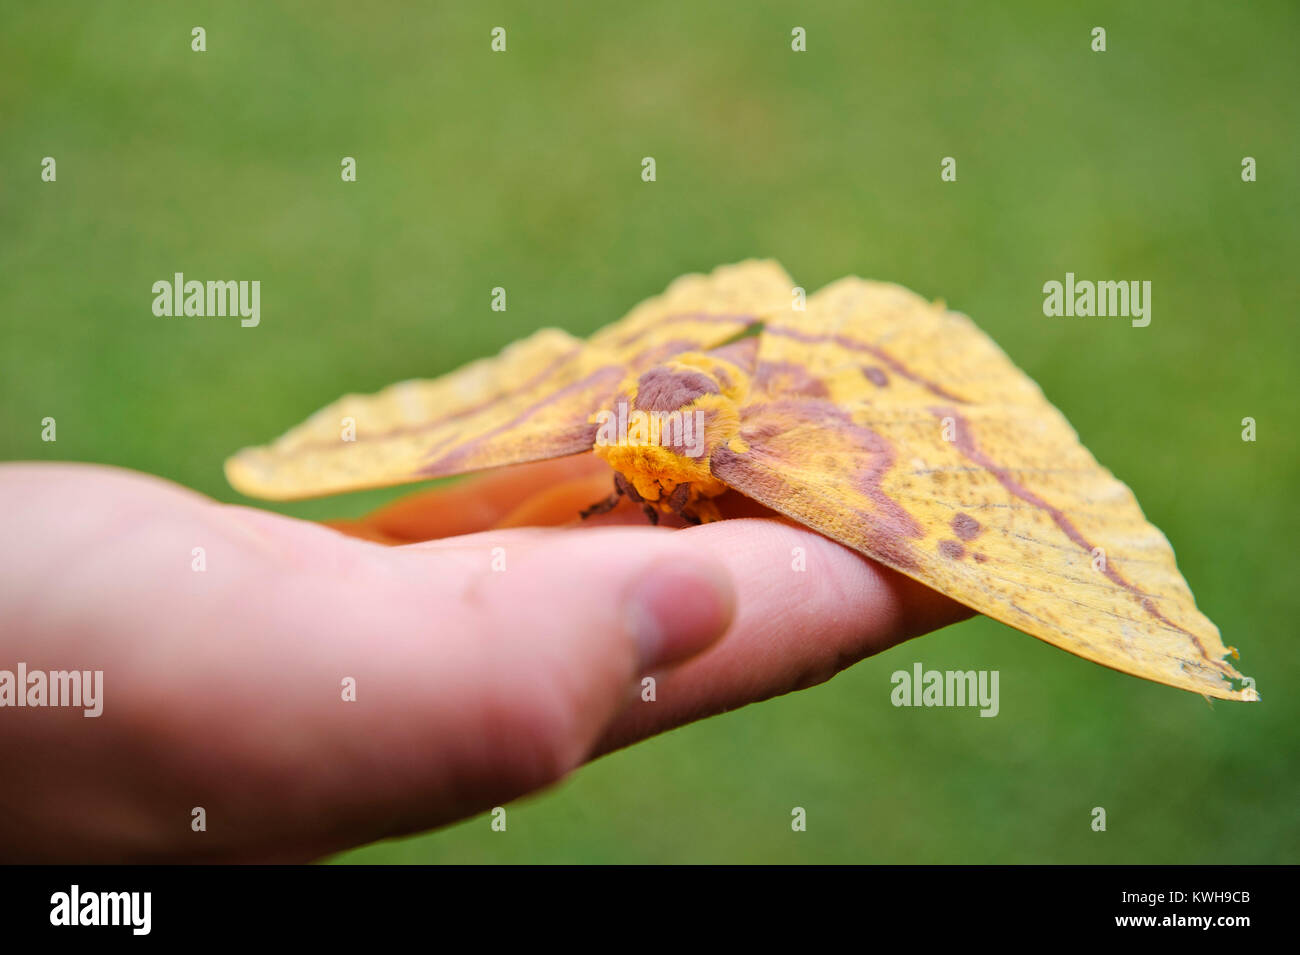 CLOSE UP OF FEMALE IMPERIAL MOTH (EACLES IMPERIALIS) Stock Photo